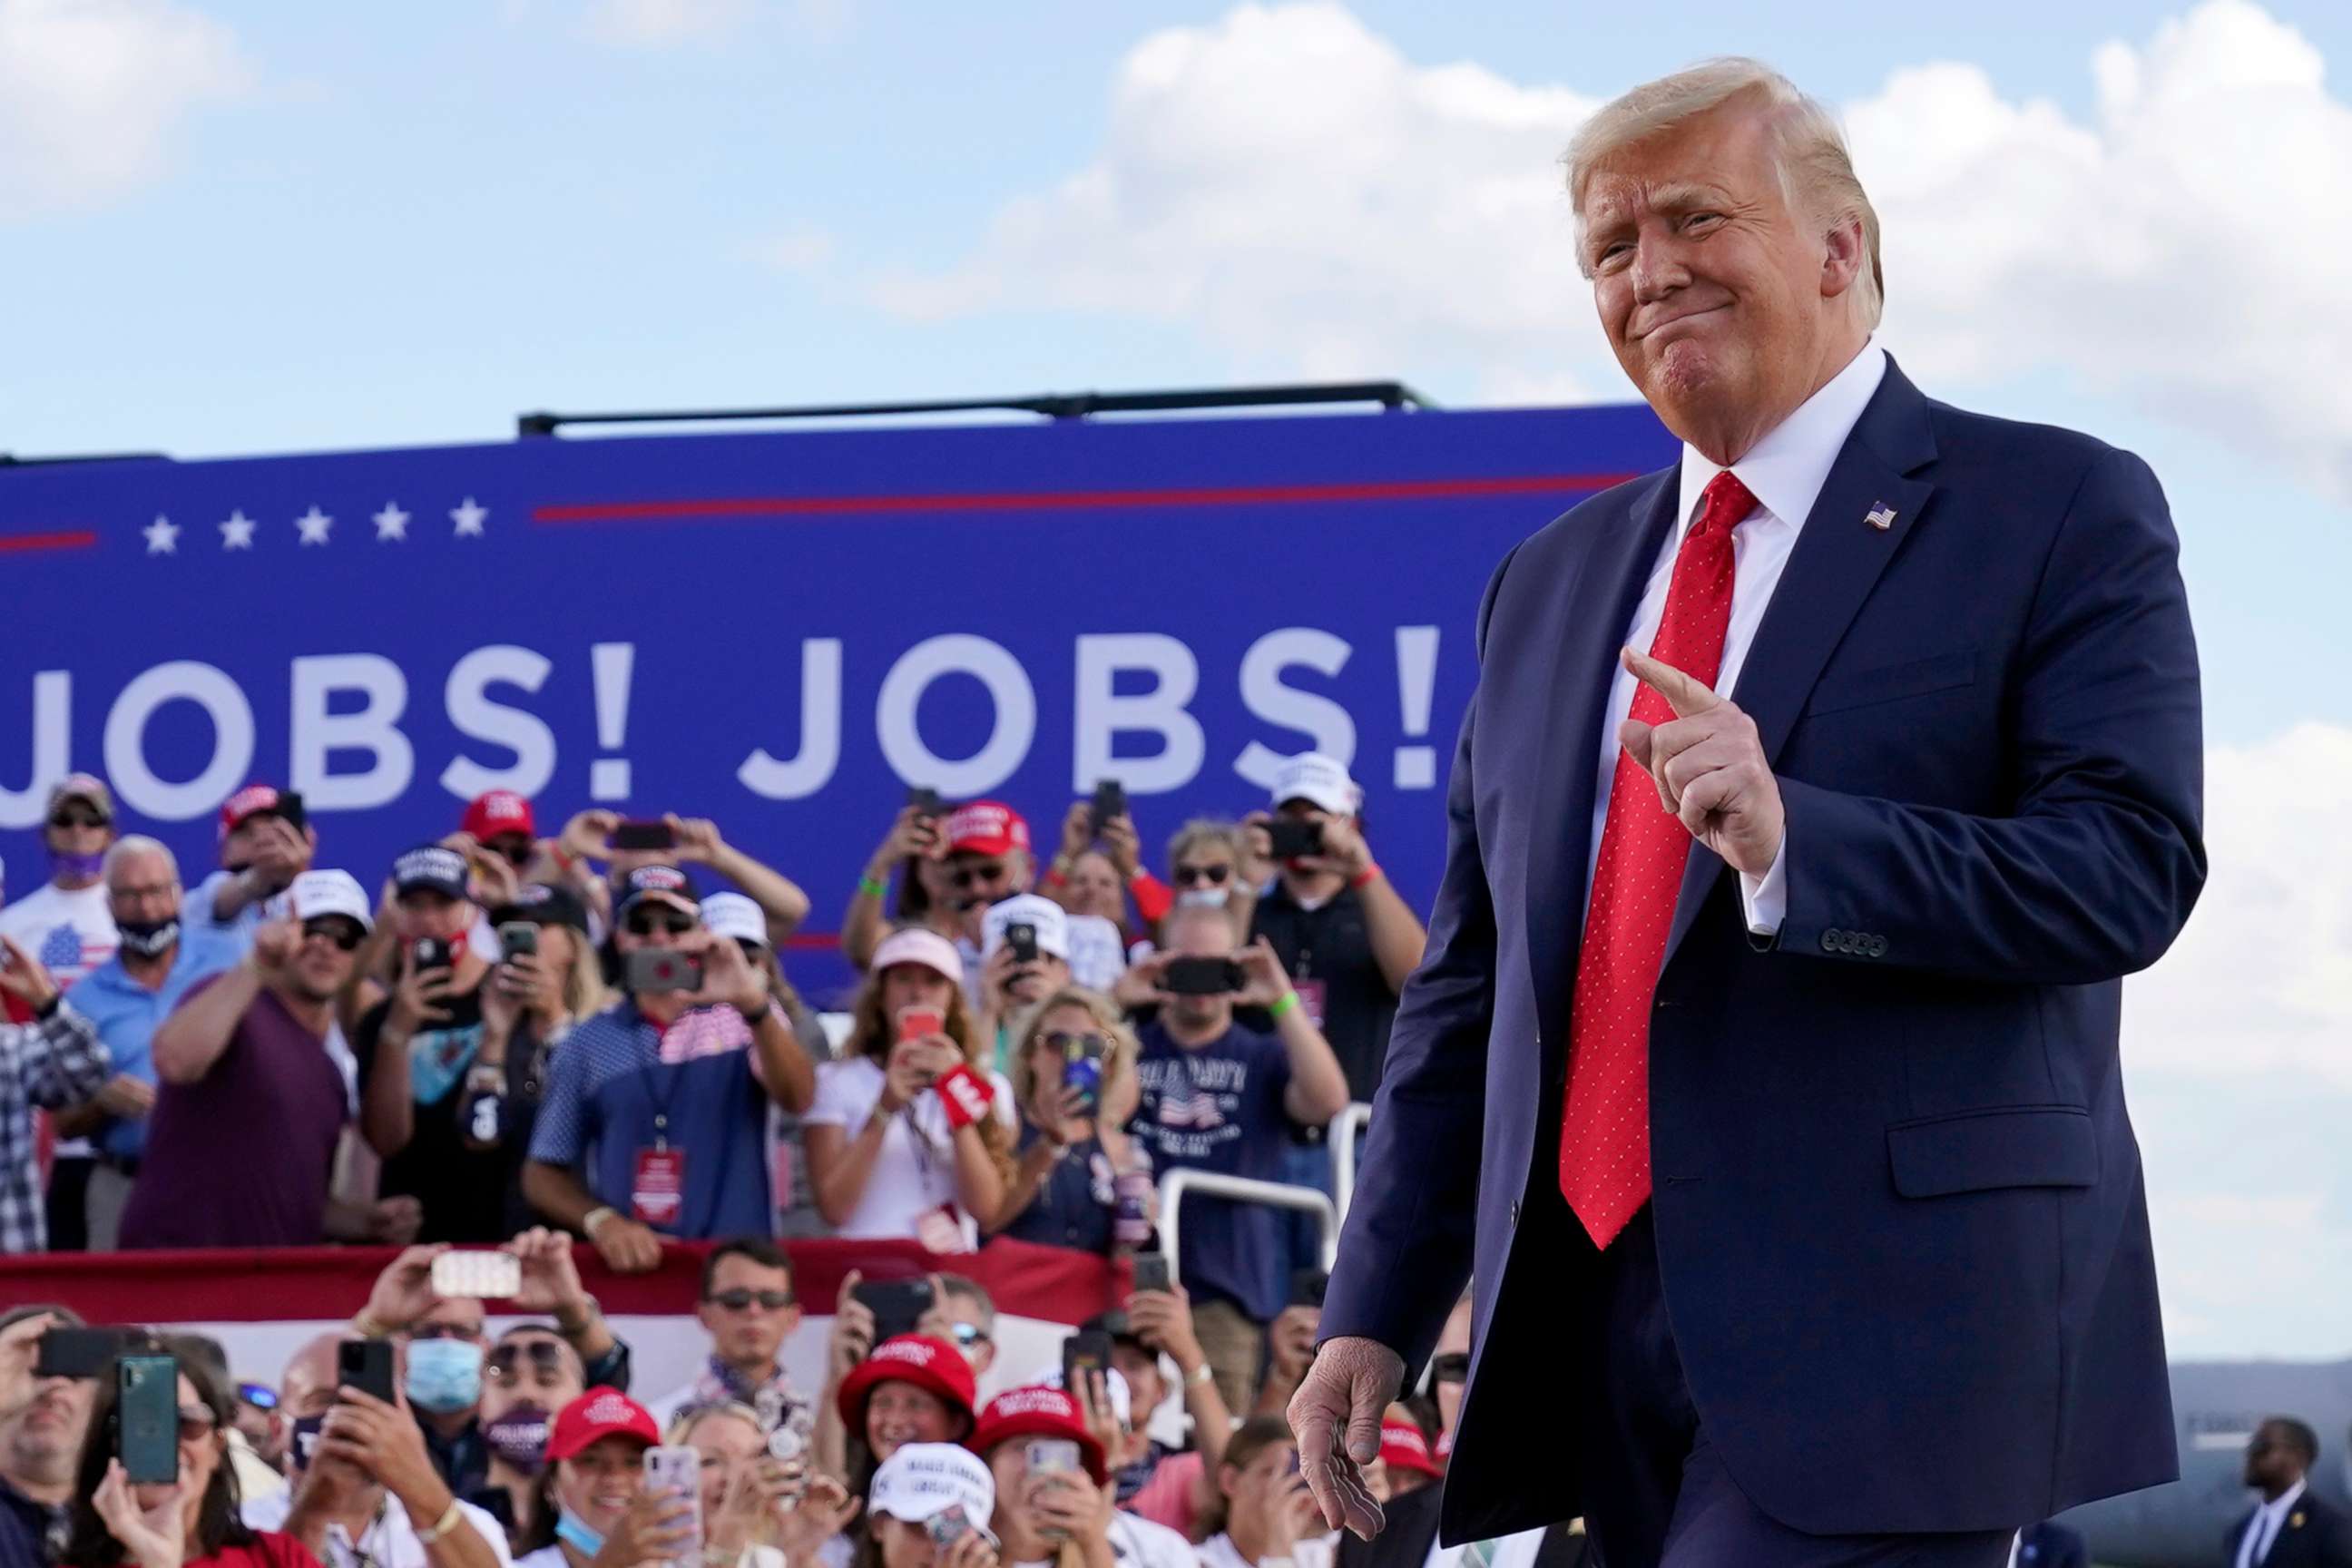 PHOTO: President Donald Trump arrives to speak at a campaign rally at Wittman Airport in Oshkosh, Wis., Aug. 17, 2020.